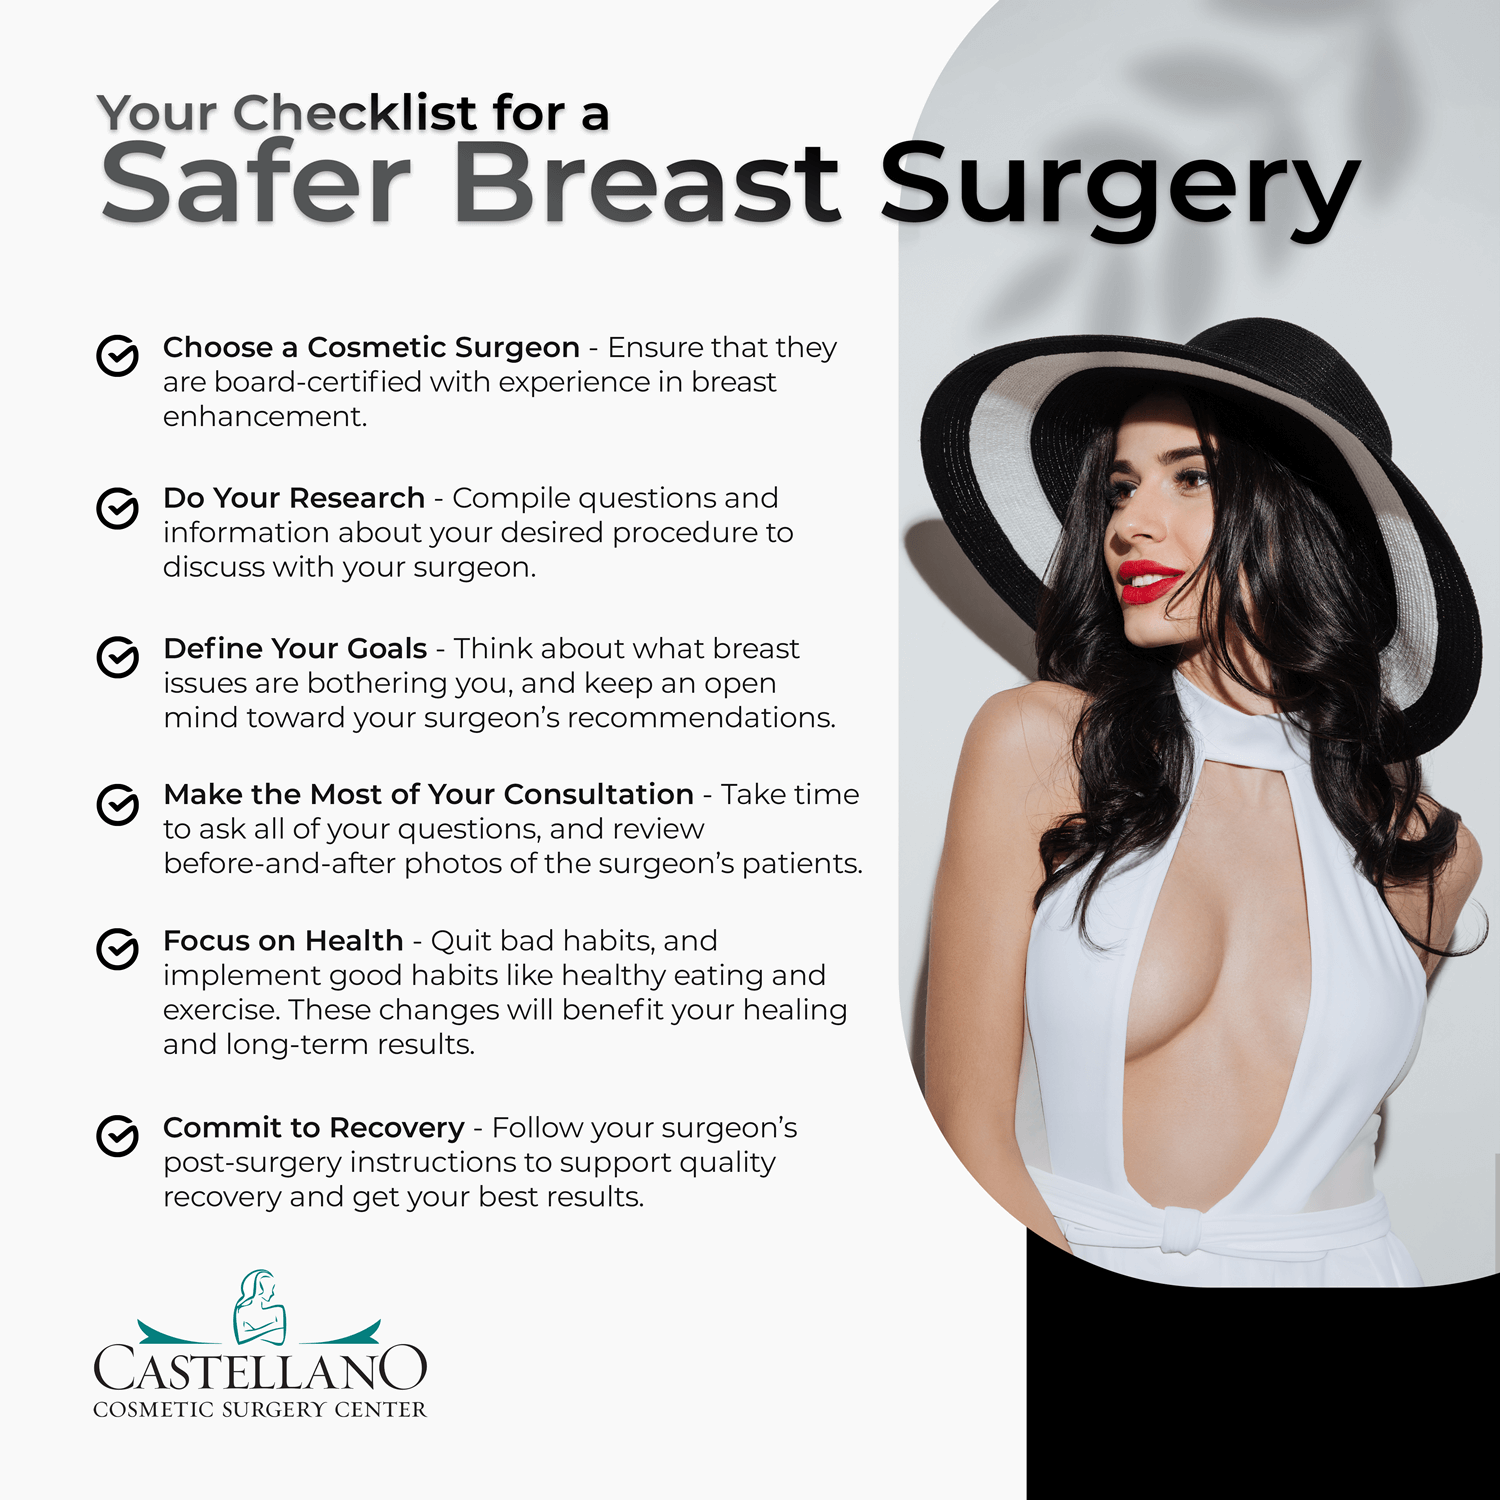 Your Checklist for a Safer Breast Surgery